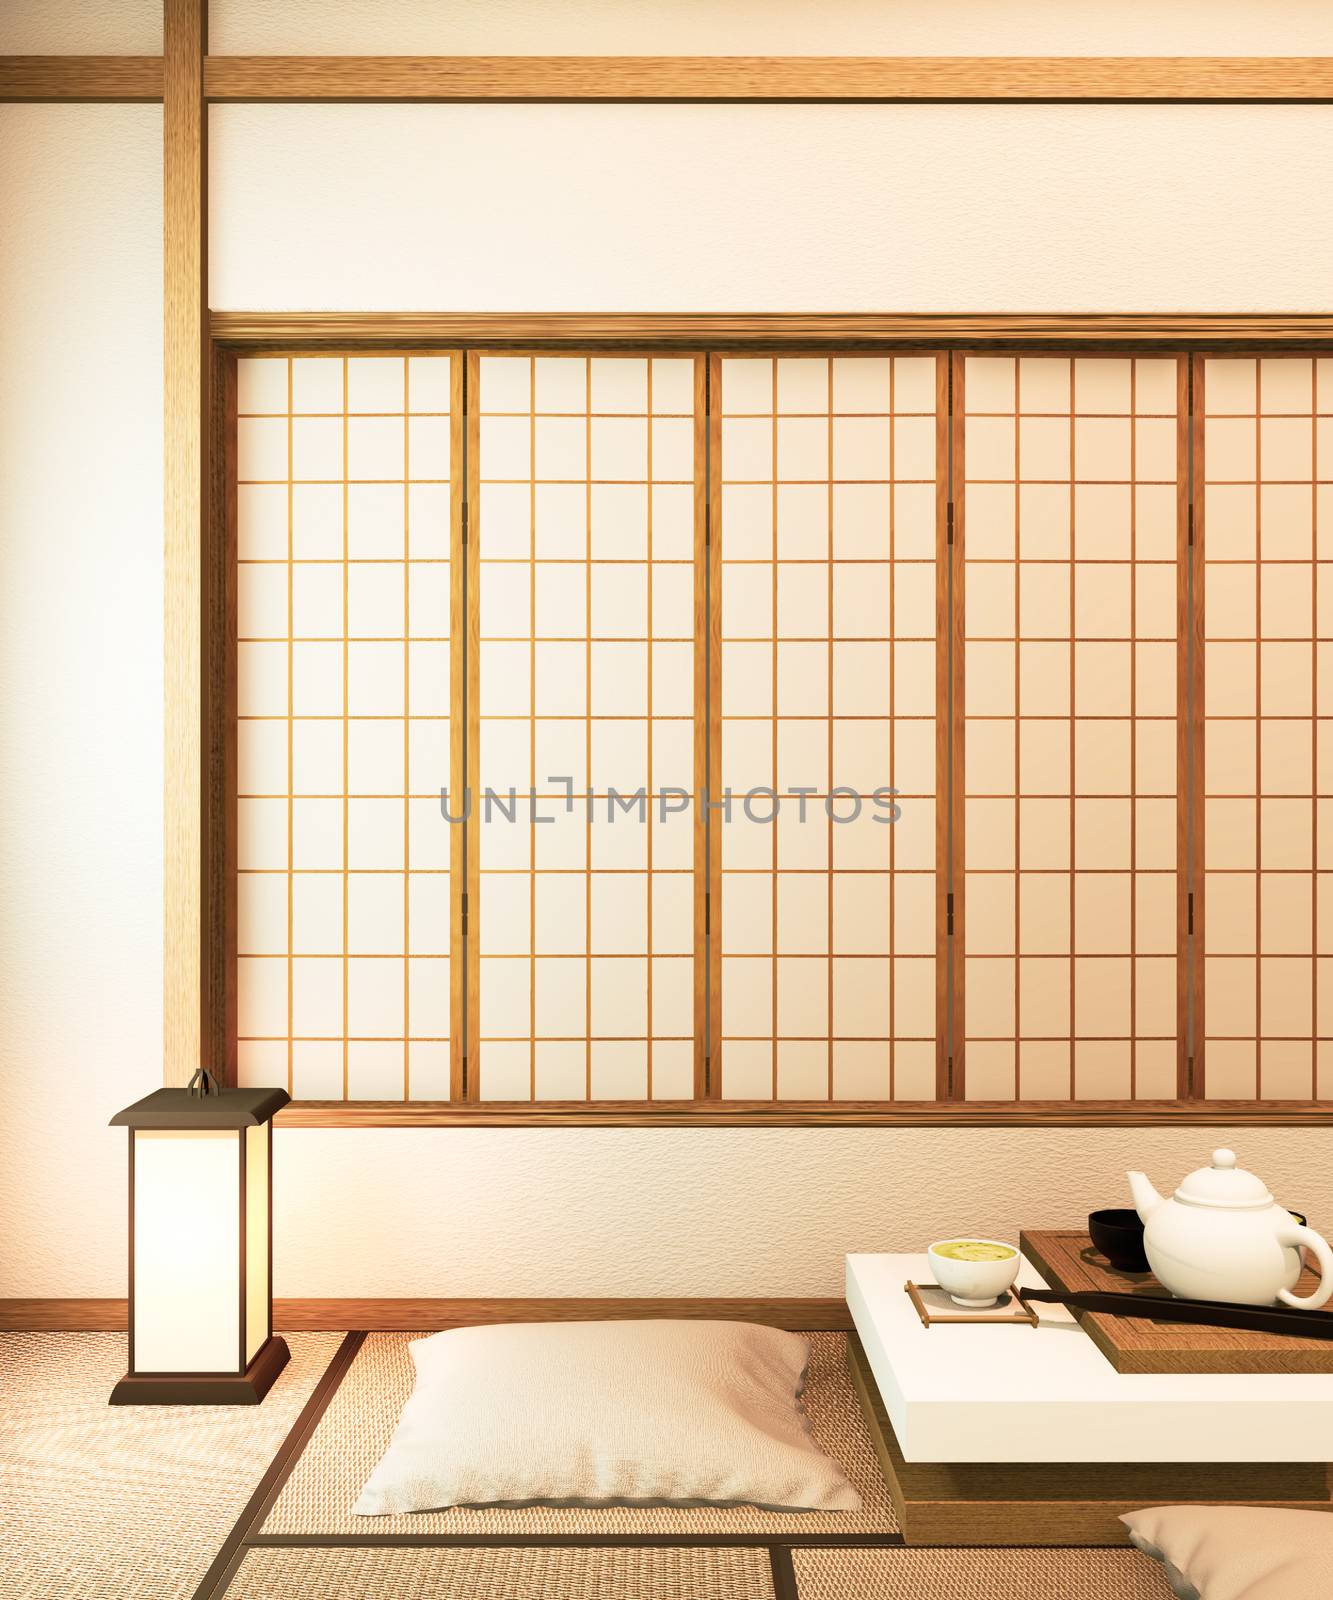 shelf wall design in room modern tropical style - empty room int by Minny0012011@hotmail.com